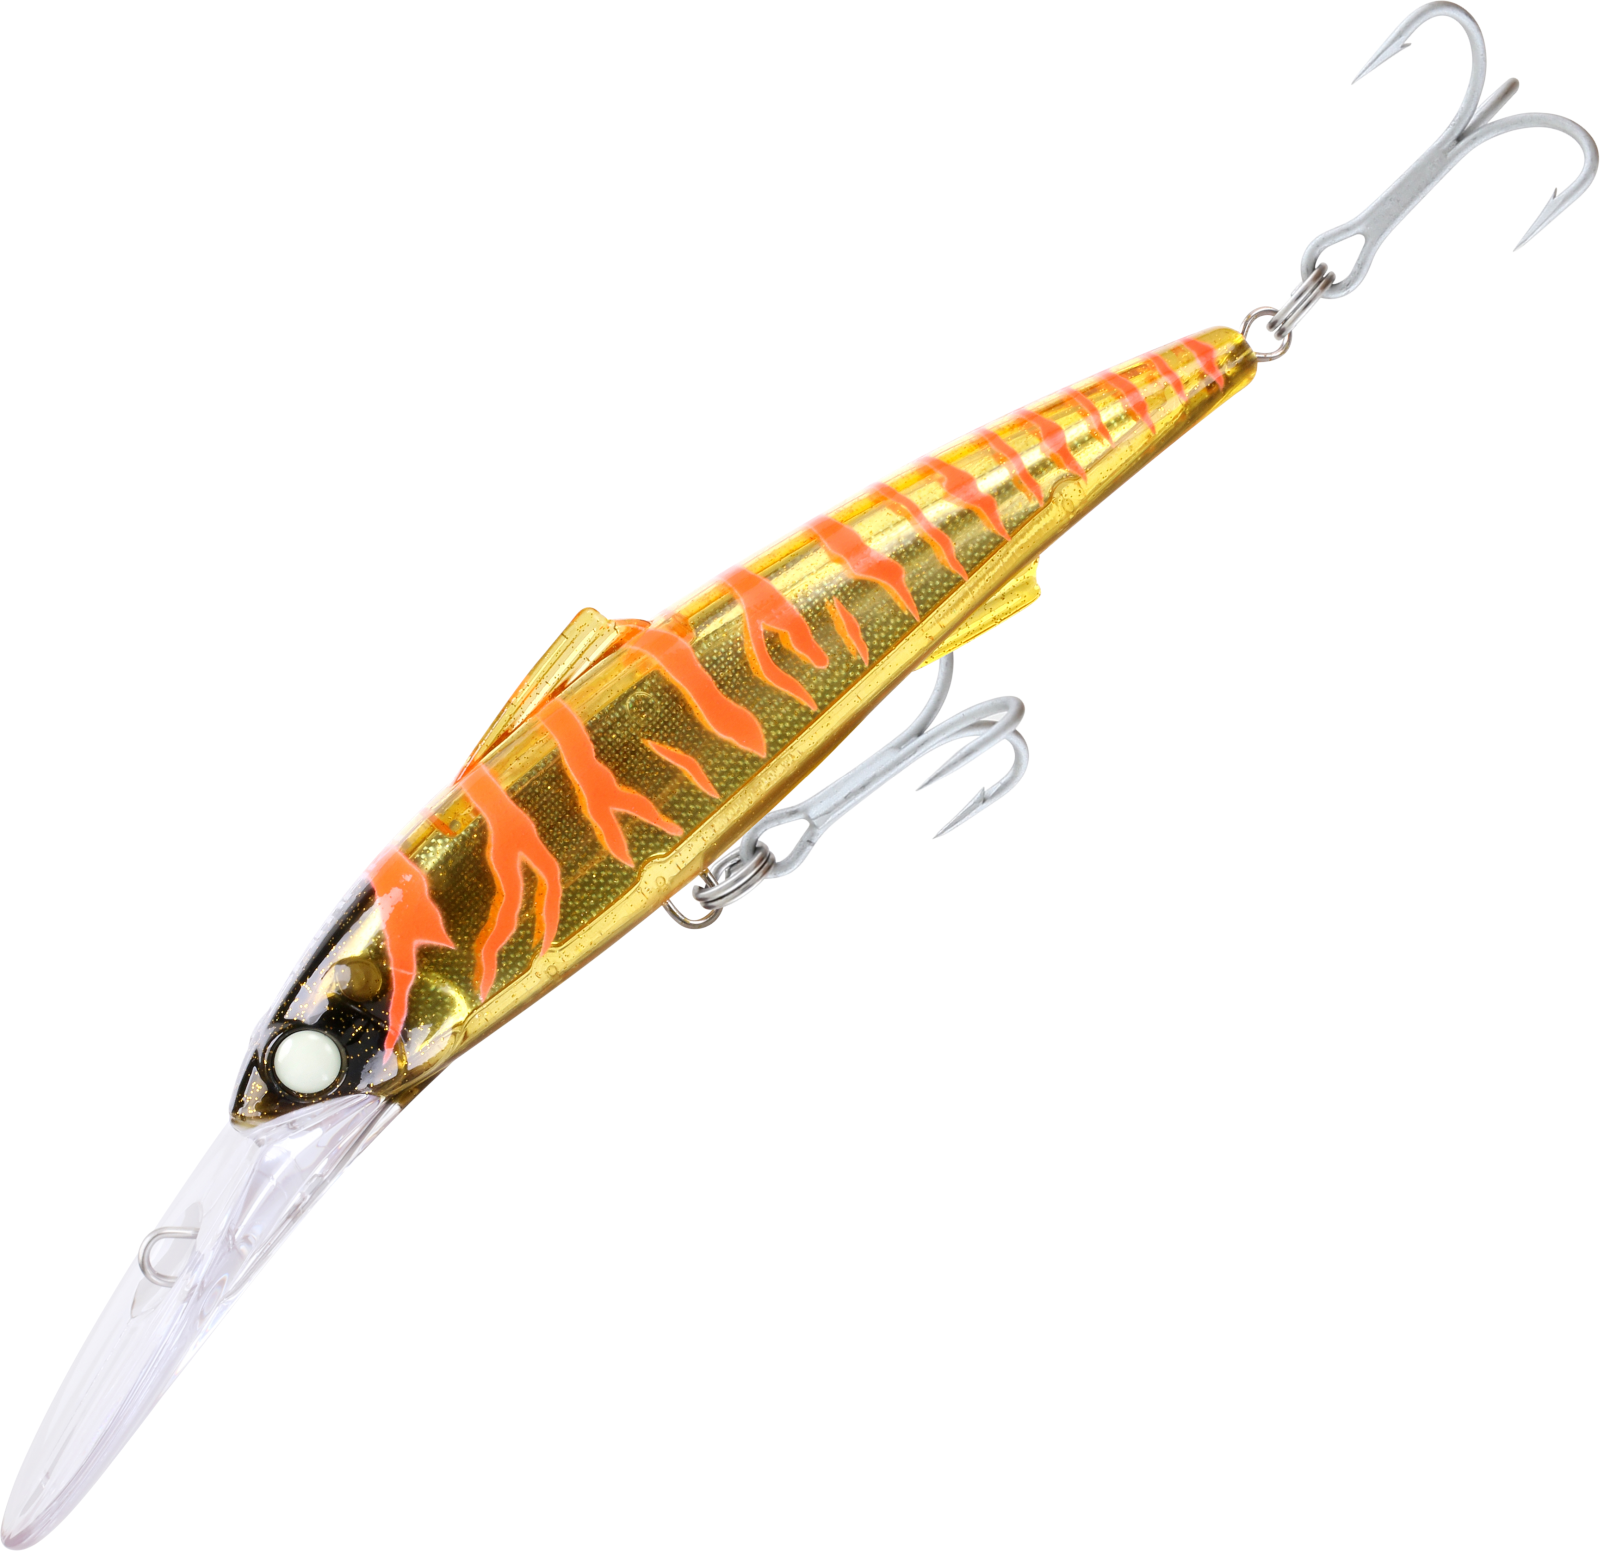 Lure of the week. Samaki Pacemaker bluewater trolling lure. 140mm and